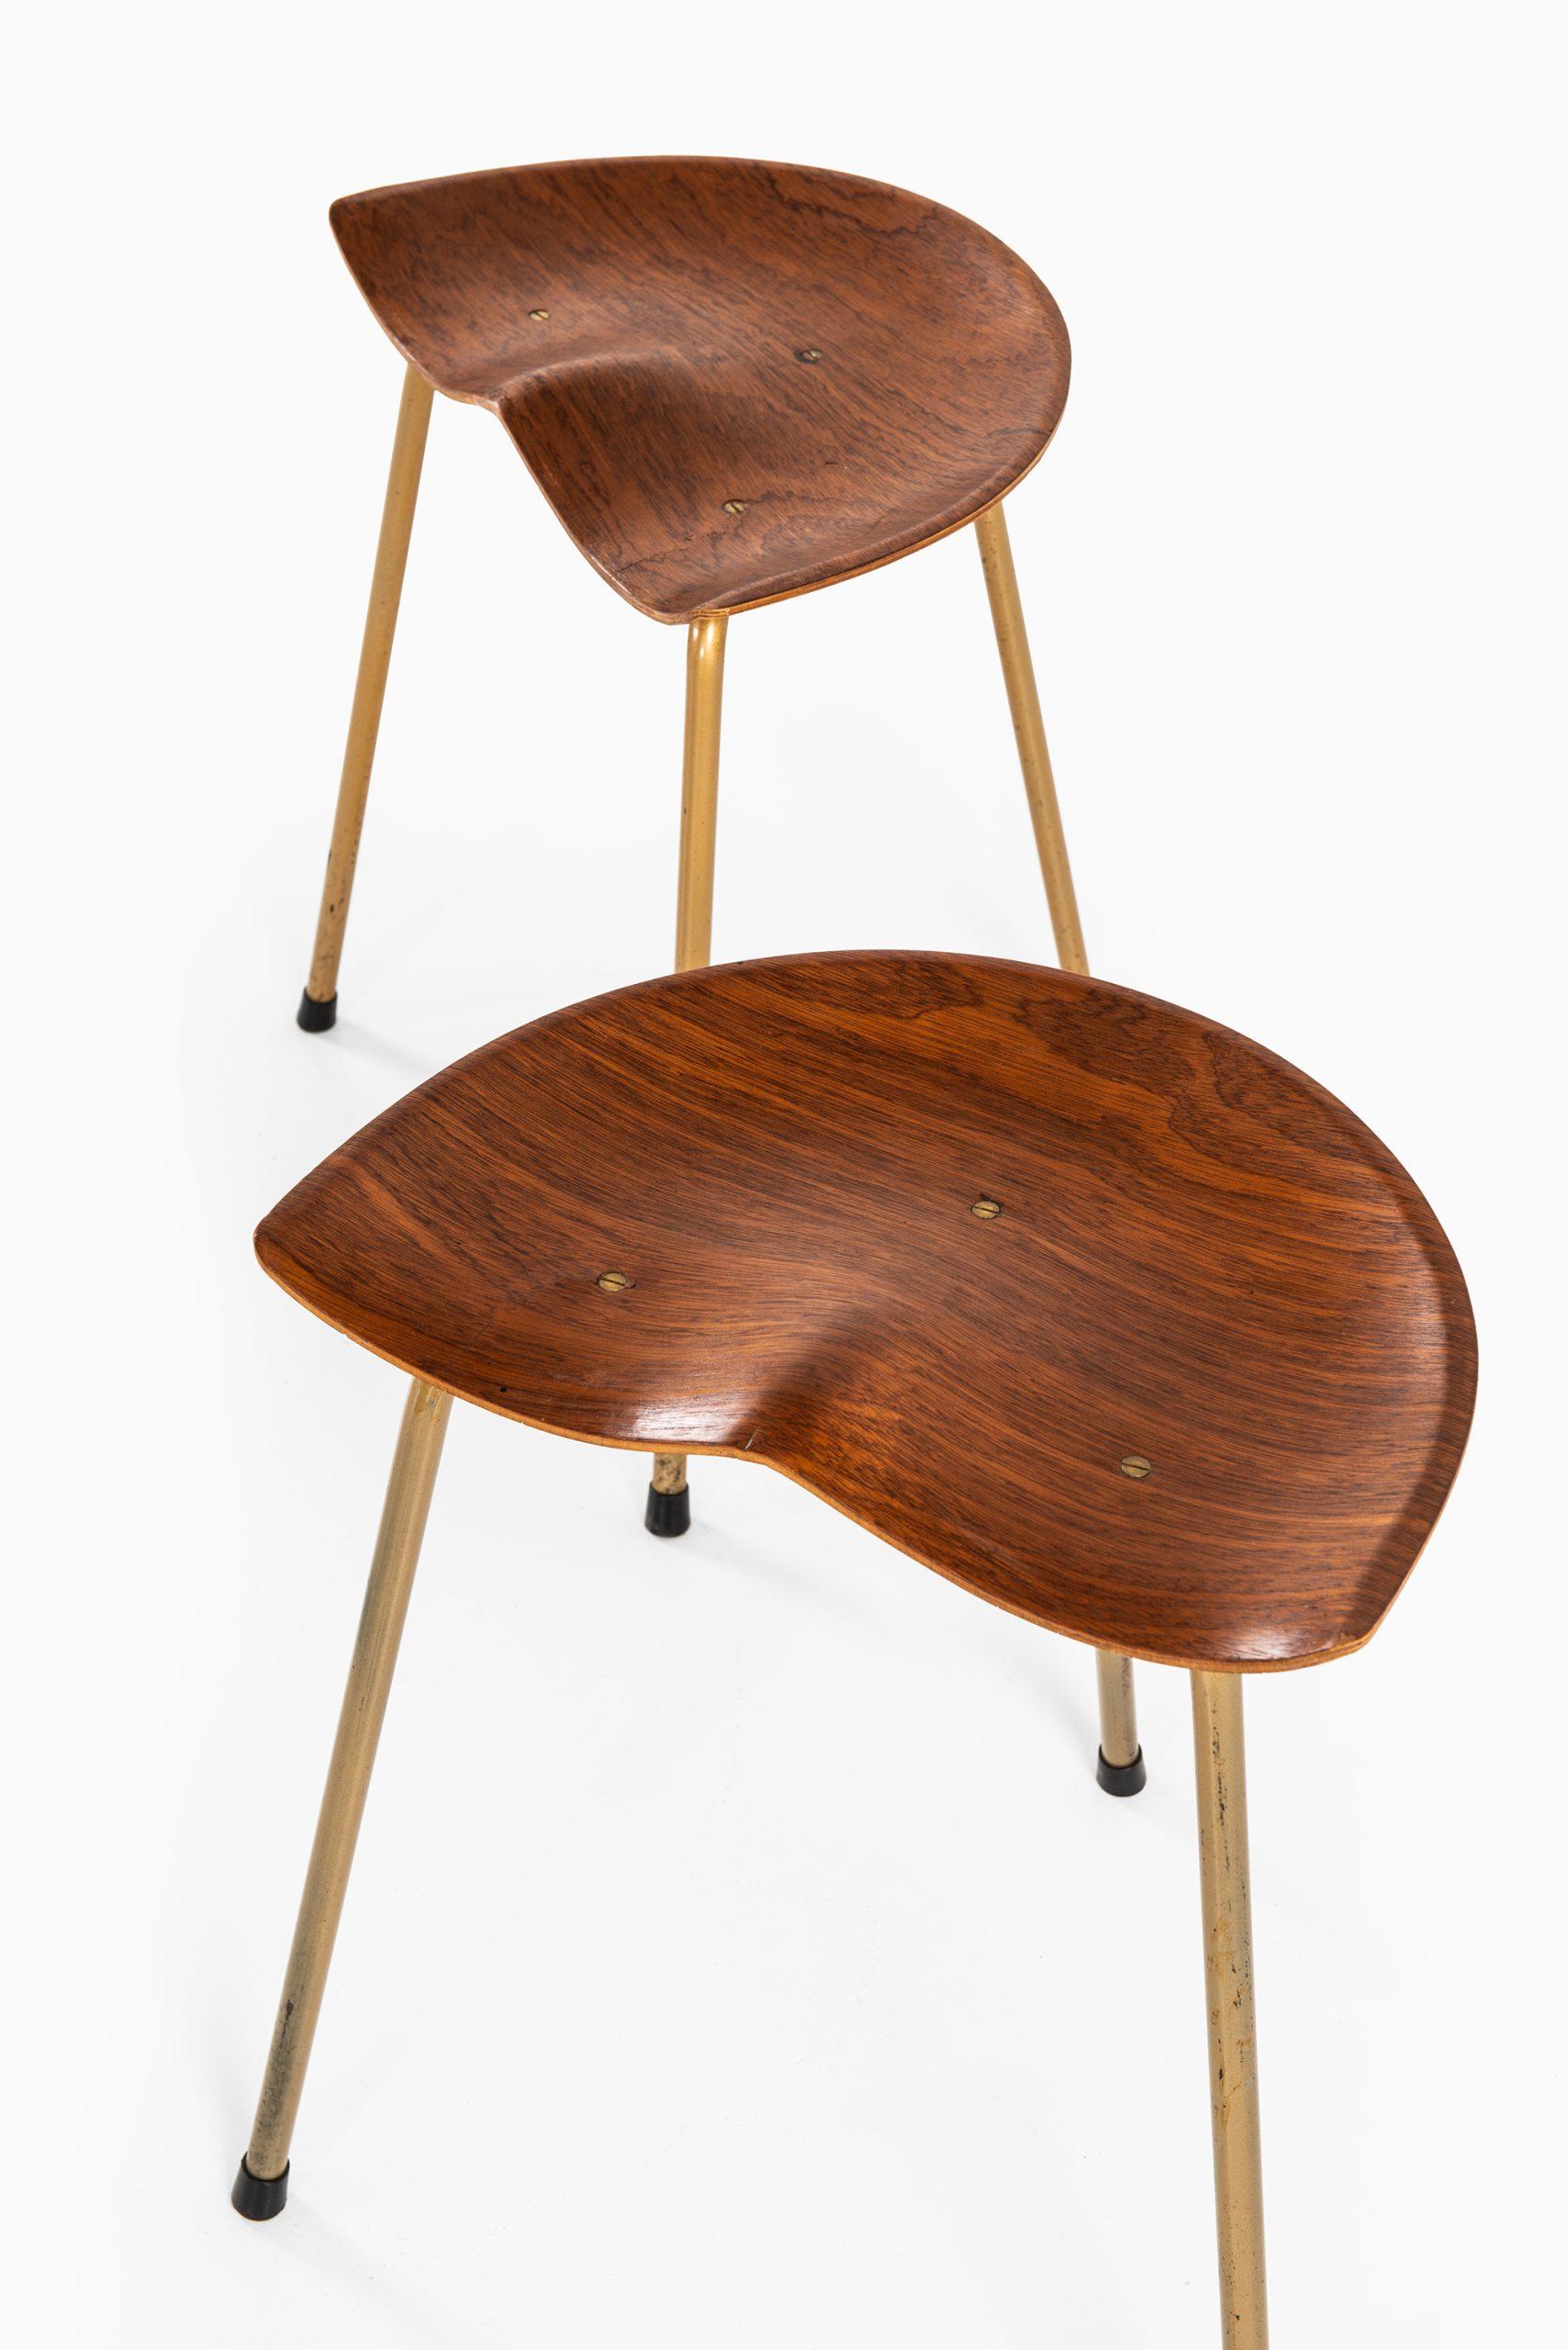 A pair of stools by unknown designer. Produced in Denmark.